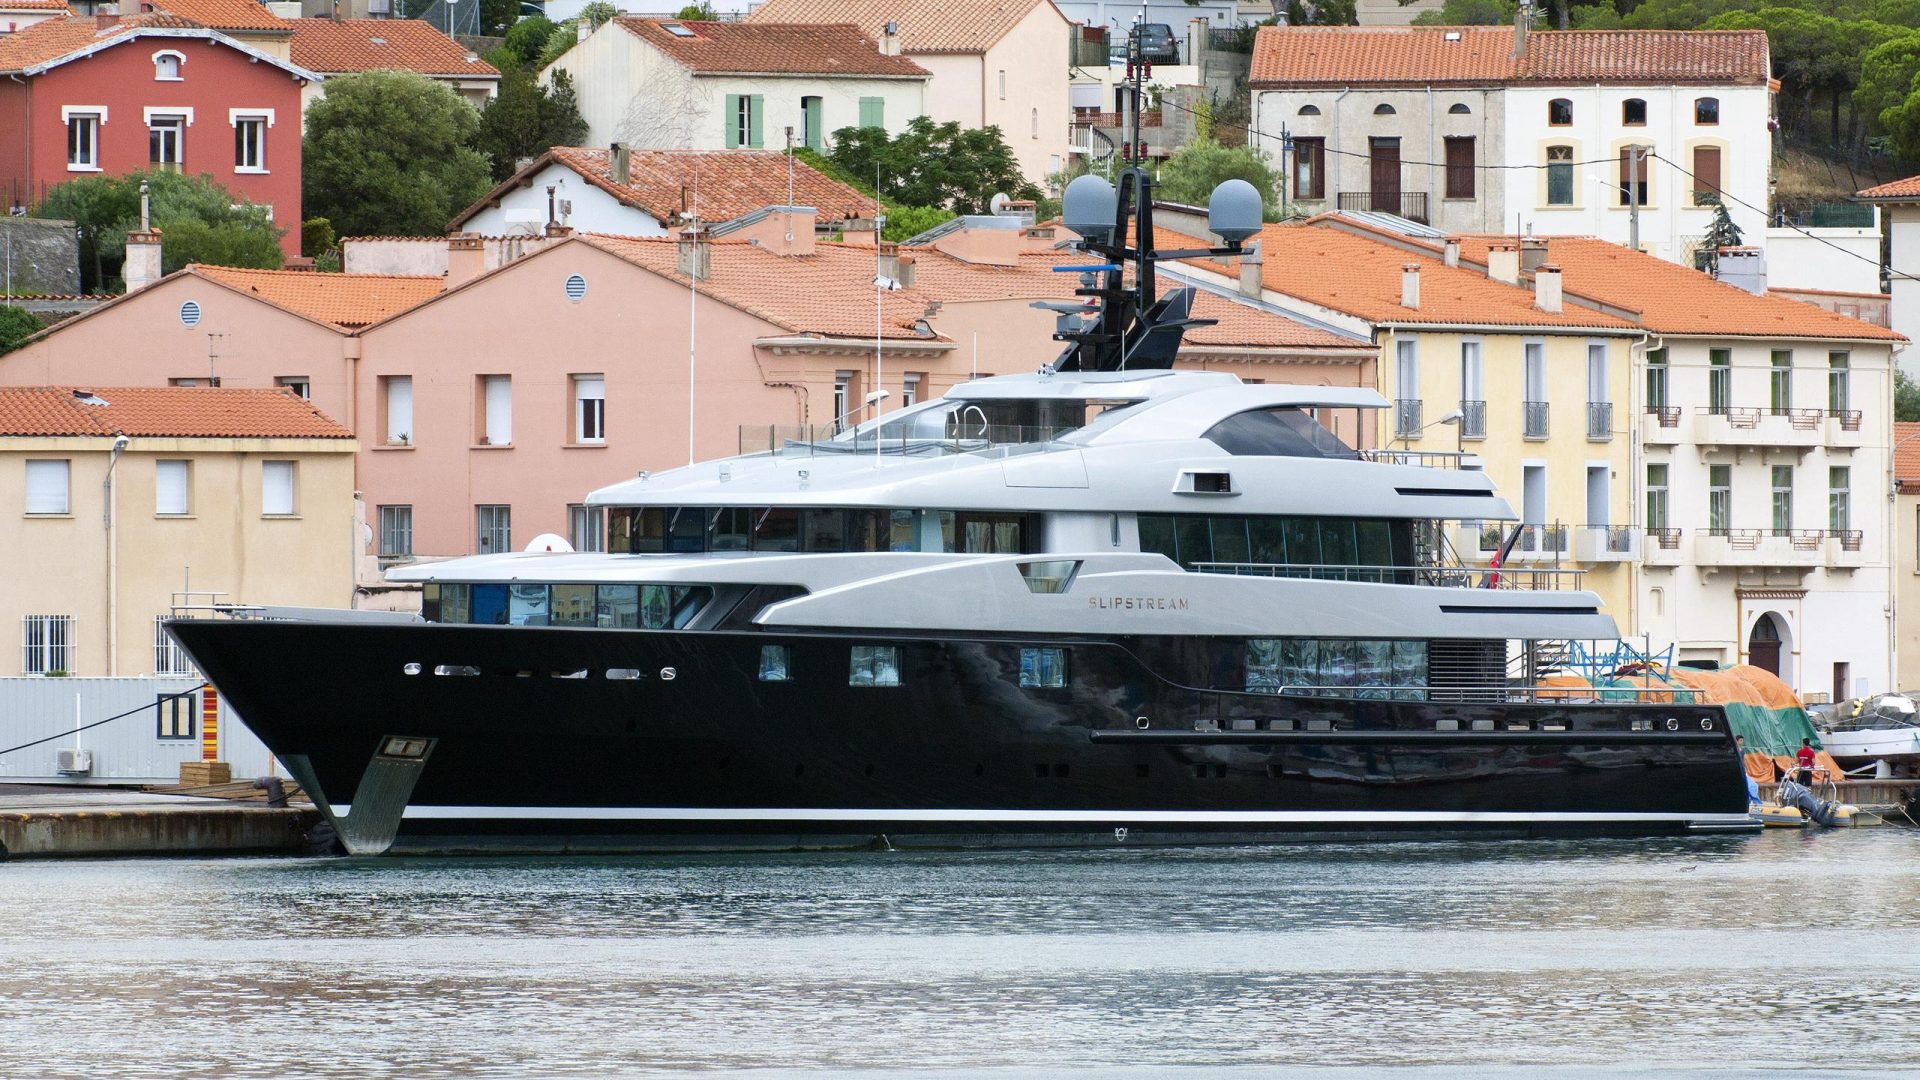 60m M/Y Slipstream is currently working with refit international